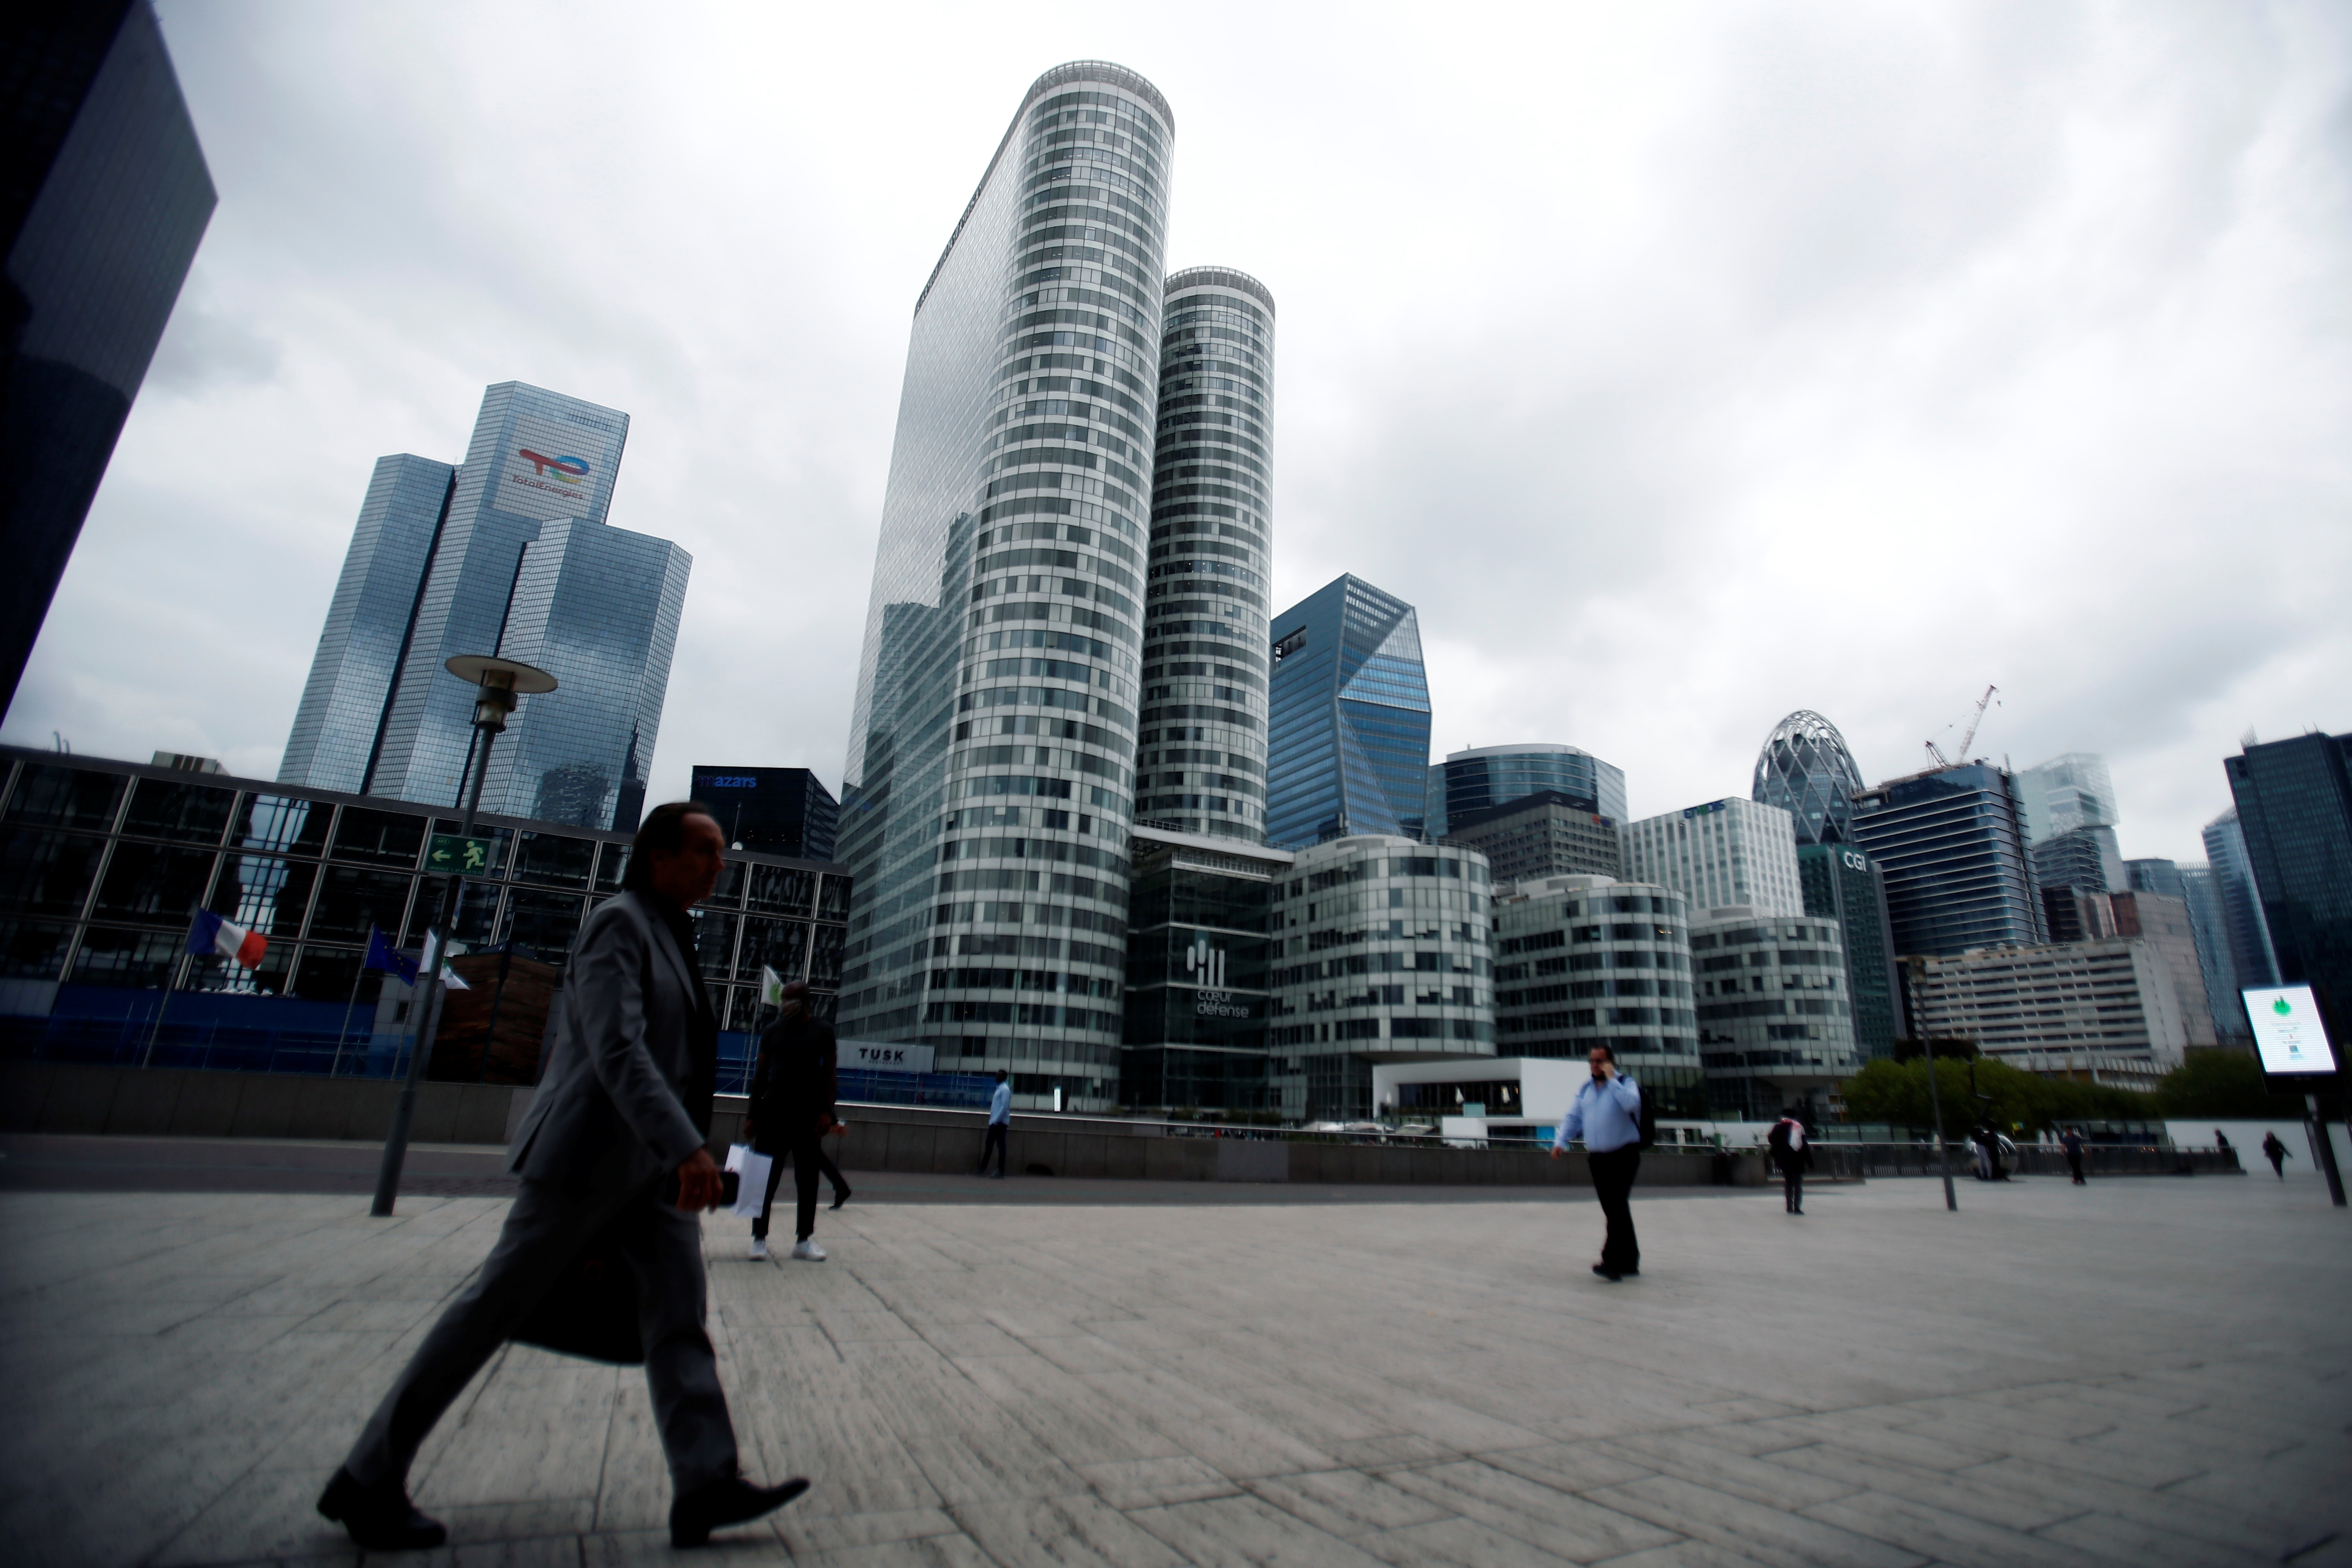 People walk through the financial and business district of La Defense in Puteaux near Paris, France, August 23, 2021. REUTERS/Sarah Meyssonnier